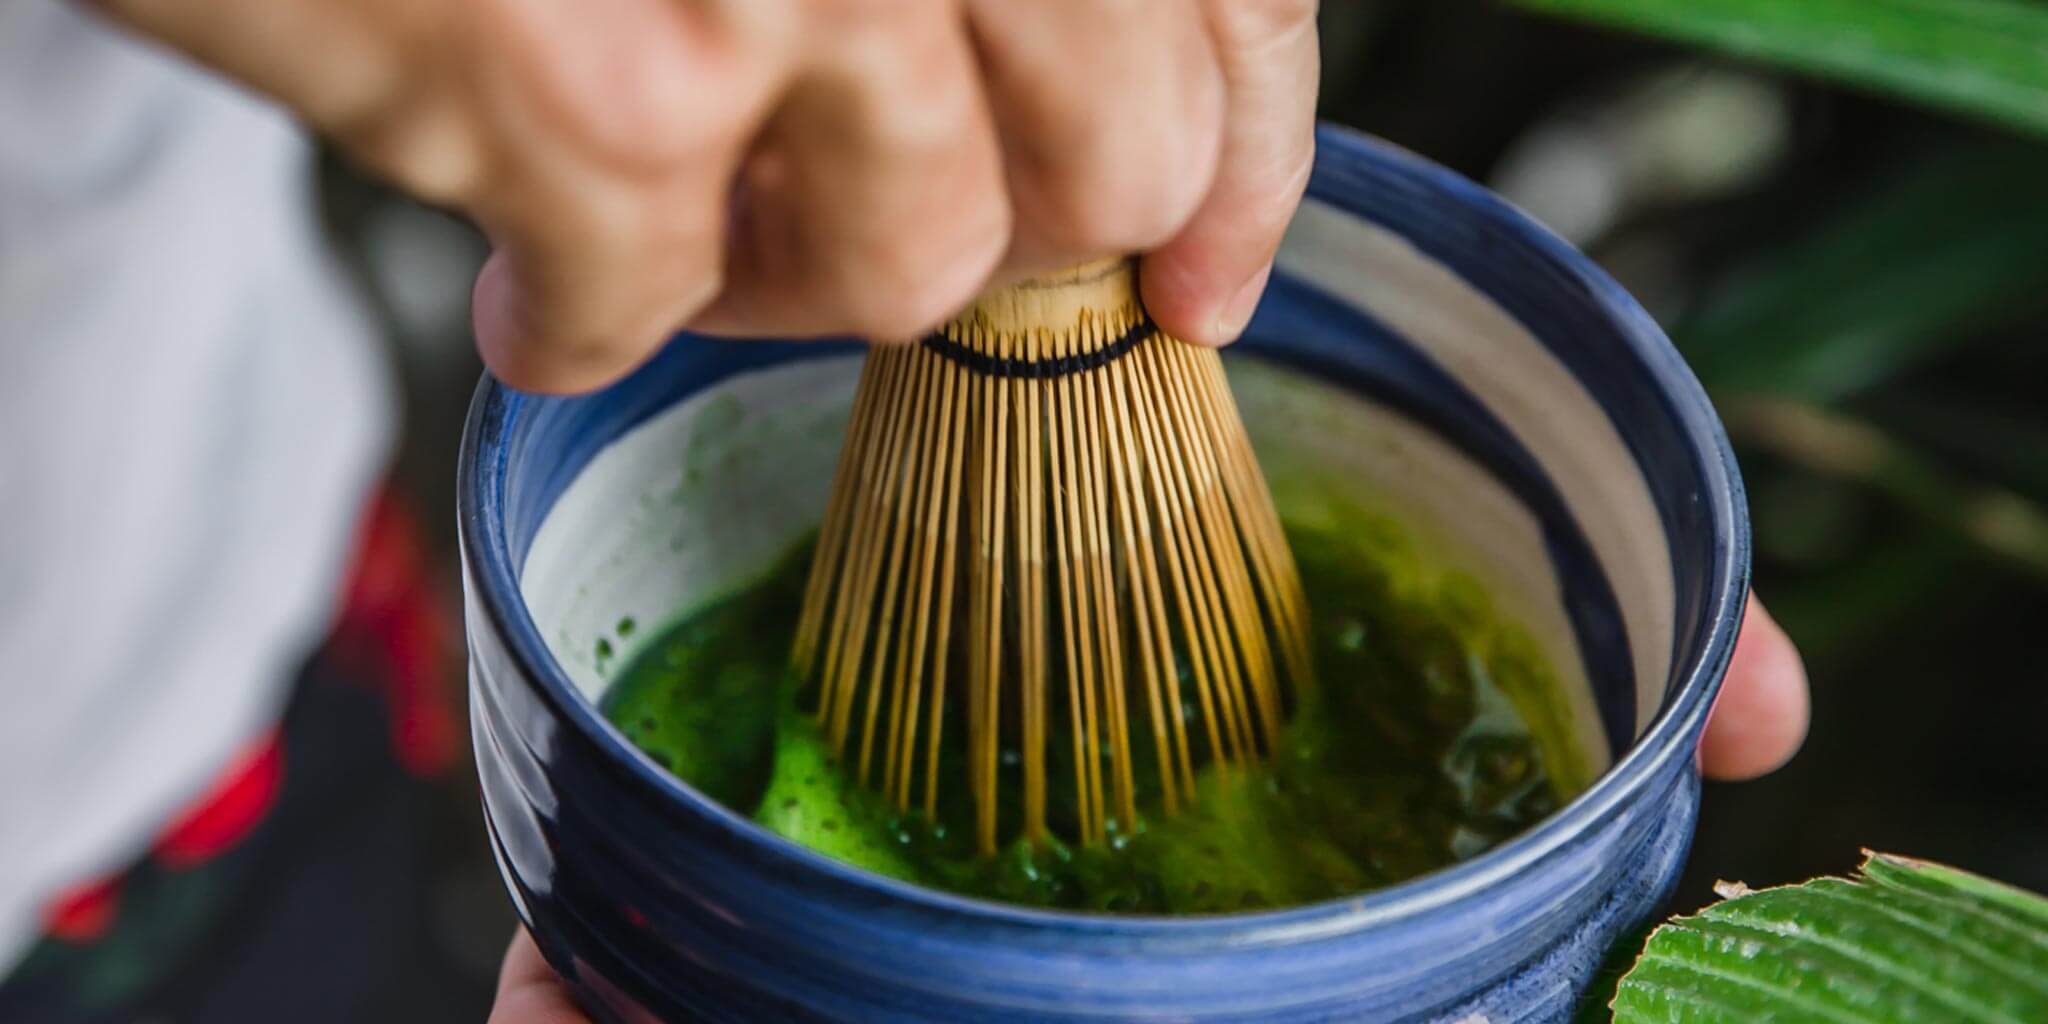 The first Matcha Cafe in Bali, serving the best ceremonial matcha green tea sourced directly from the farm in Uji, Kyoto region of Japan